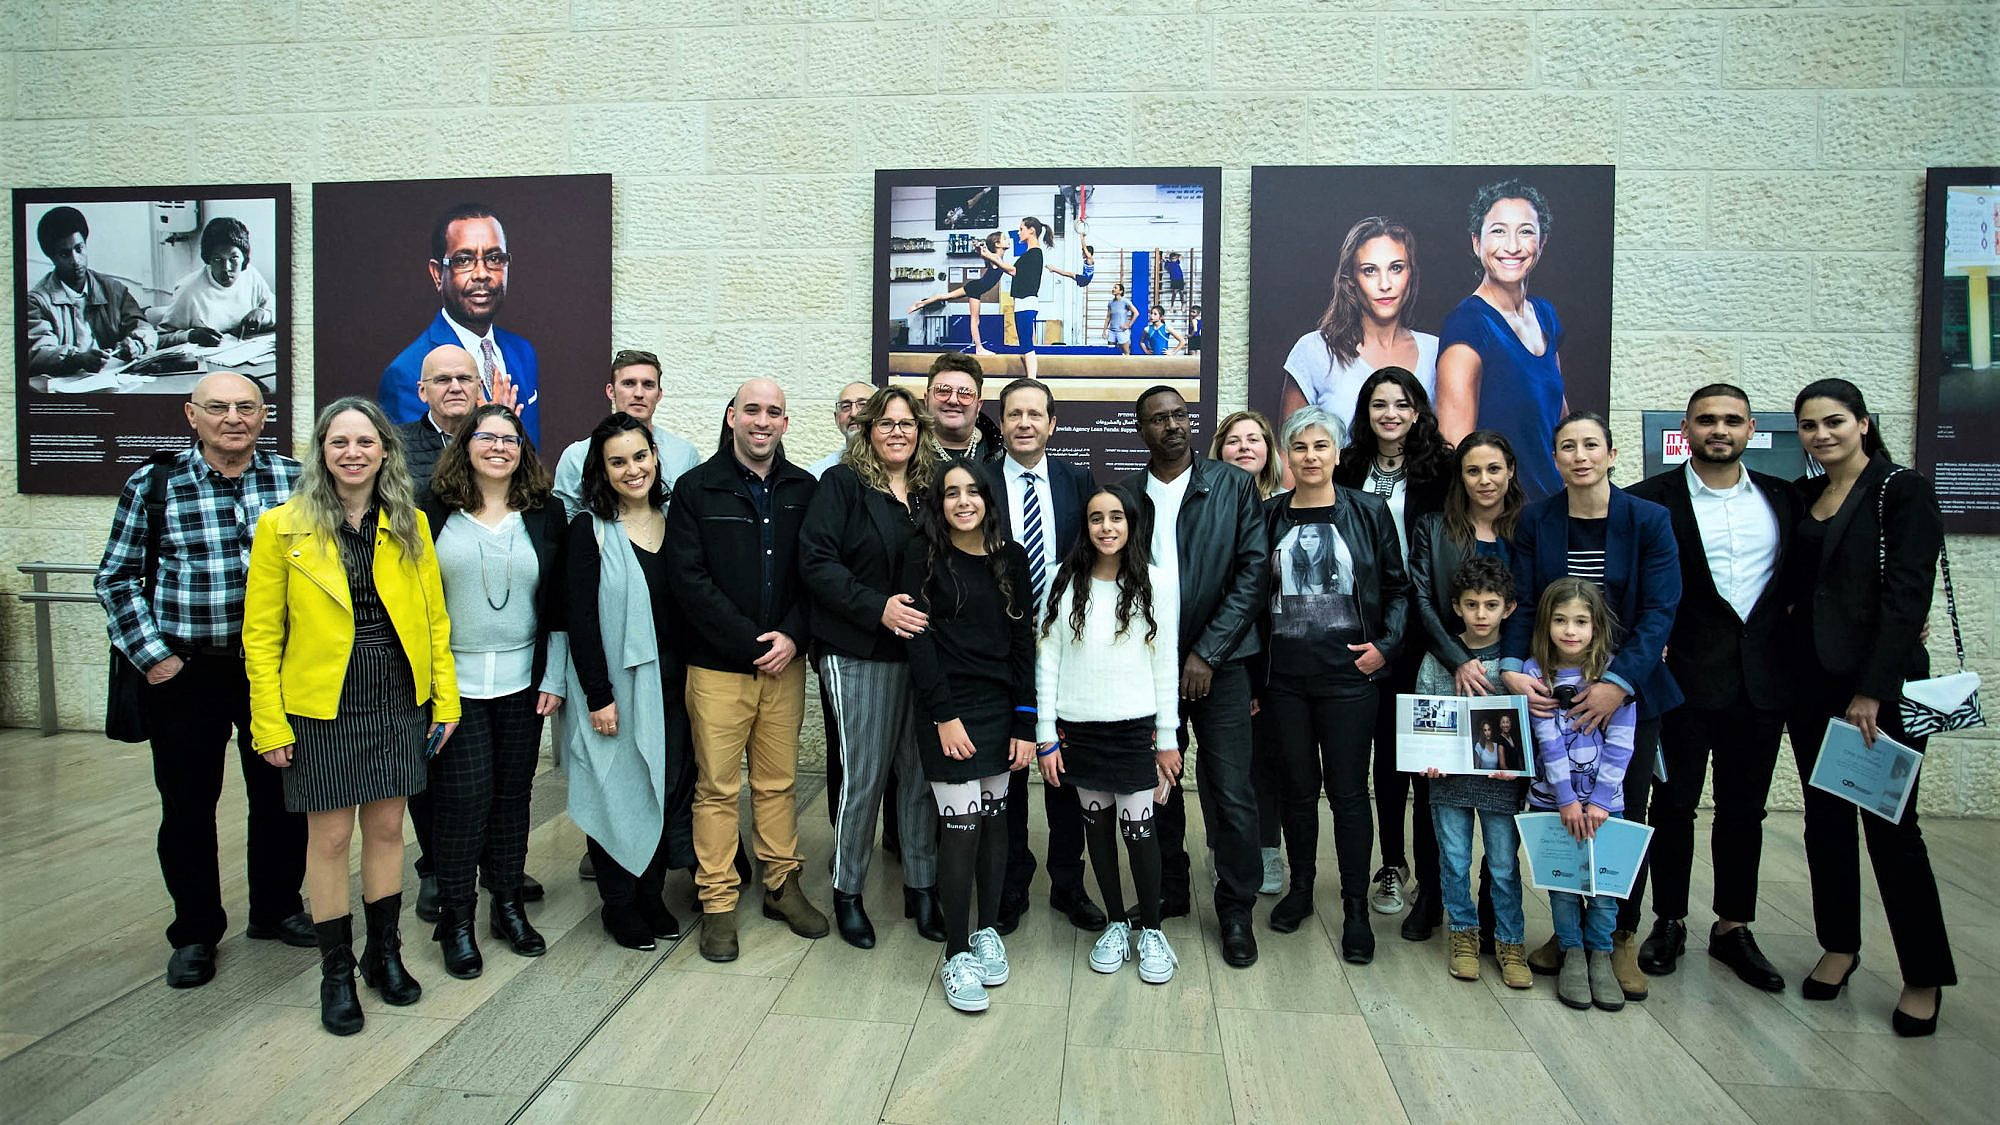 Jewish Agency for Israel chairman Isaac Herzog and CEO Amira Ahronoviz (at center) with some of the subjects of the exhibit. Photo by Dror Sithakol.